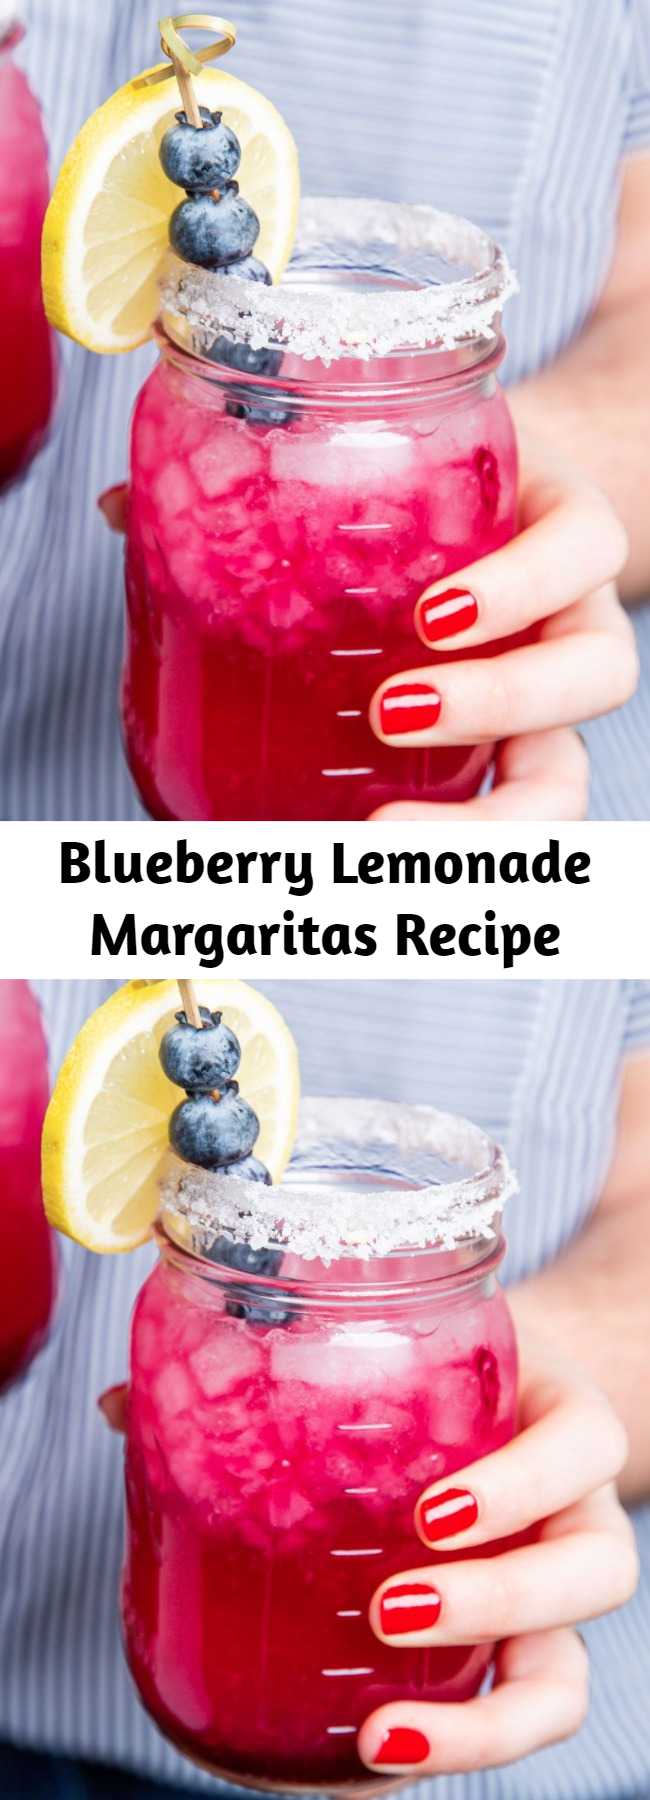 Blueberry Lemonade Margaritas Recipe - Seize the best of summer with these Blueberry Lemonade Margaritas. These refreshing (and beautiful) margaritas start with a homemade blueberry syrup.